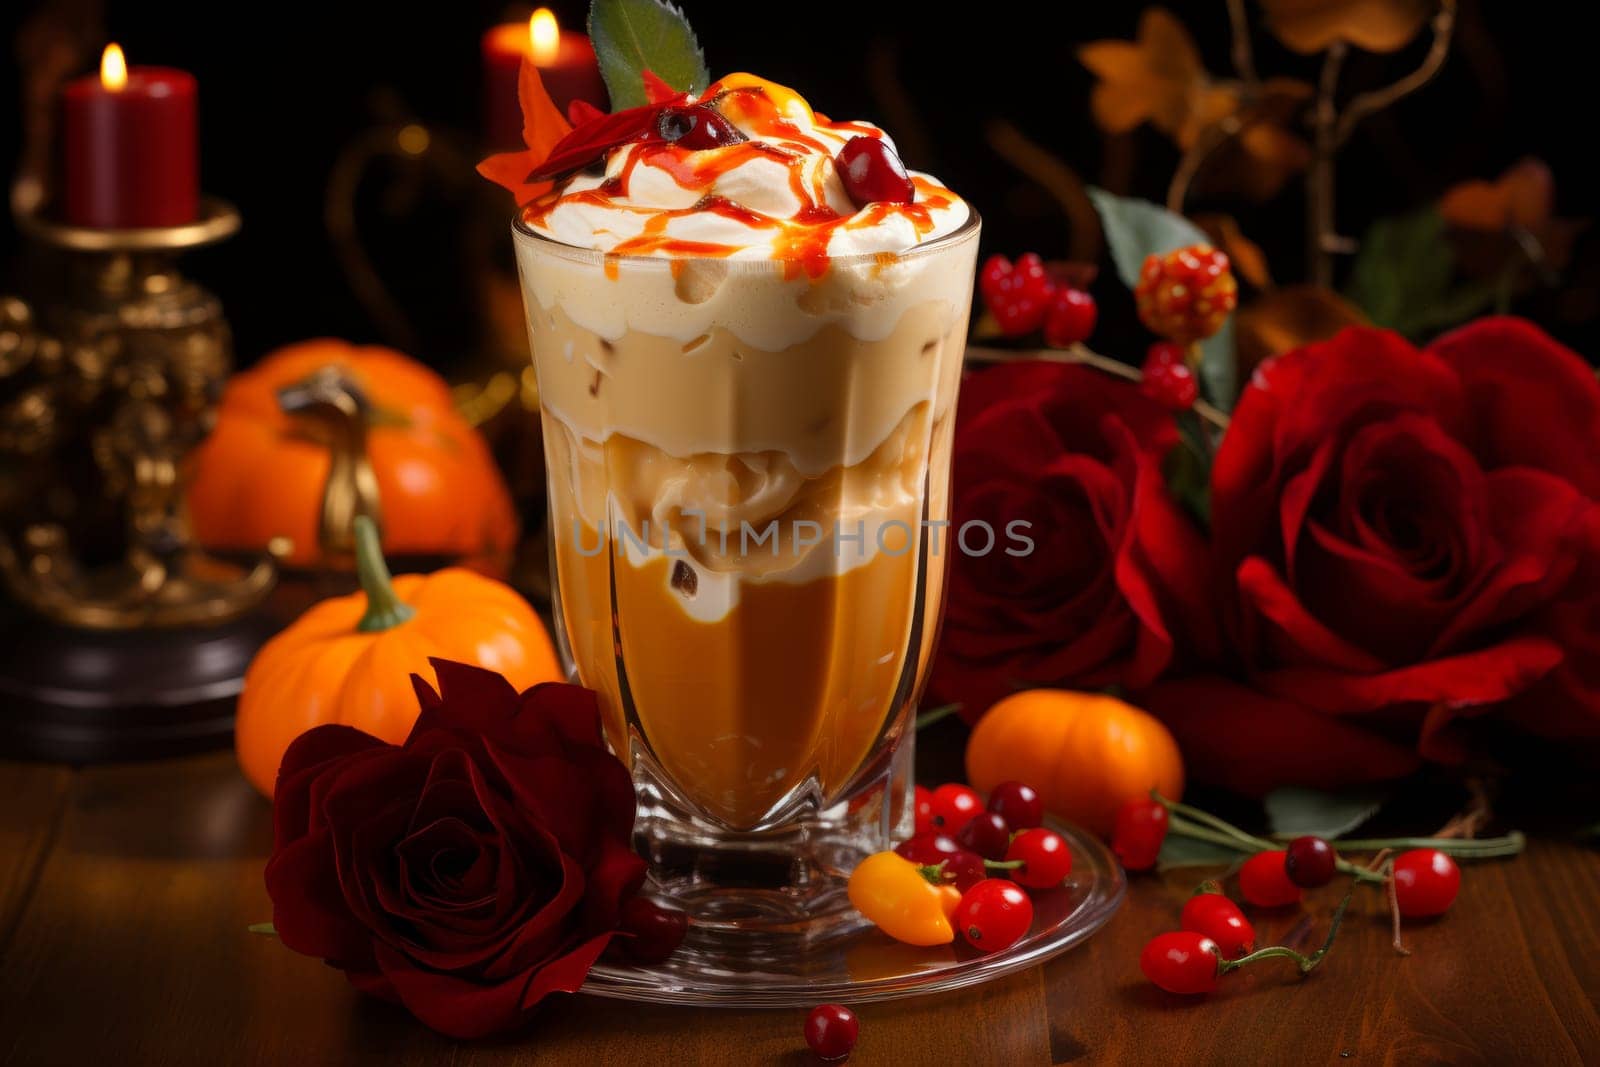 Stylishly presented cold latte with chili pepper in a cozy and vibrant cafe ambiance